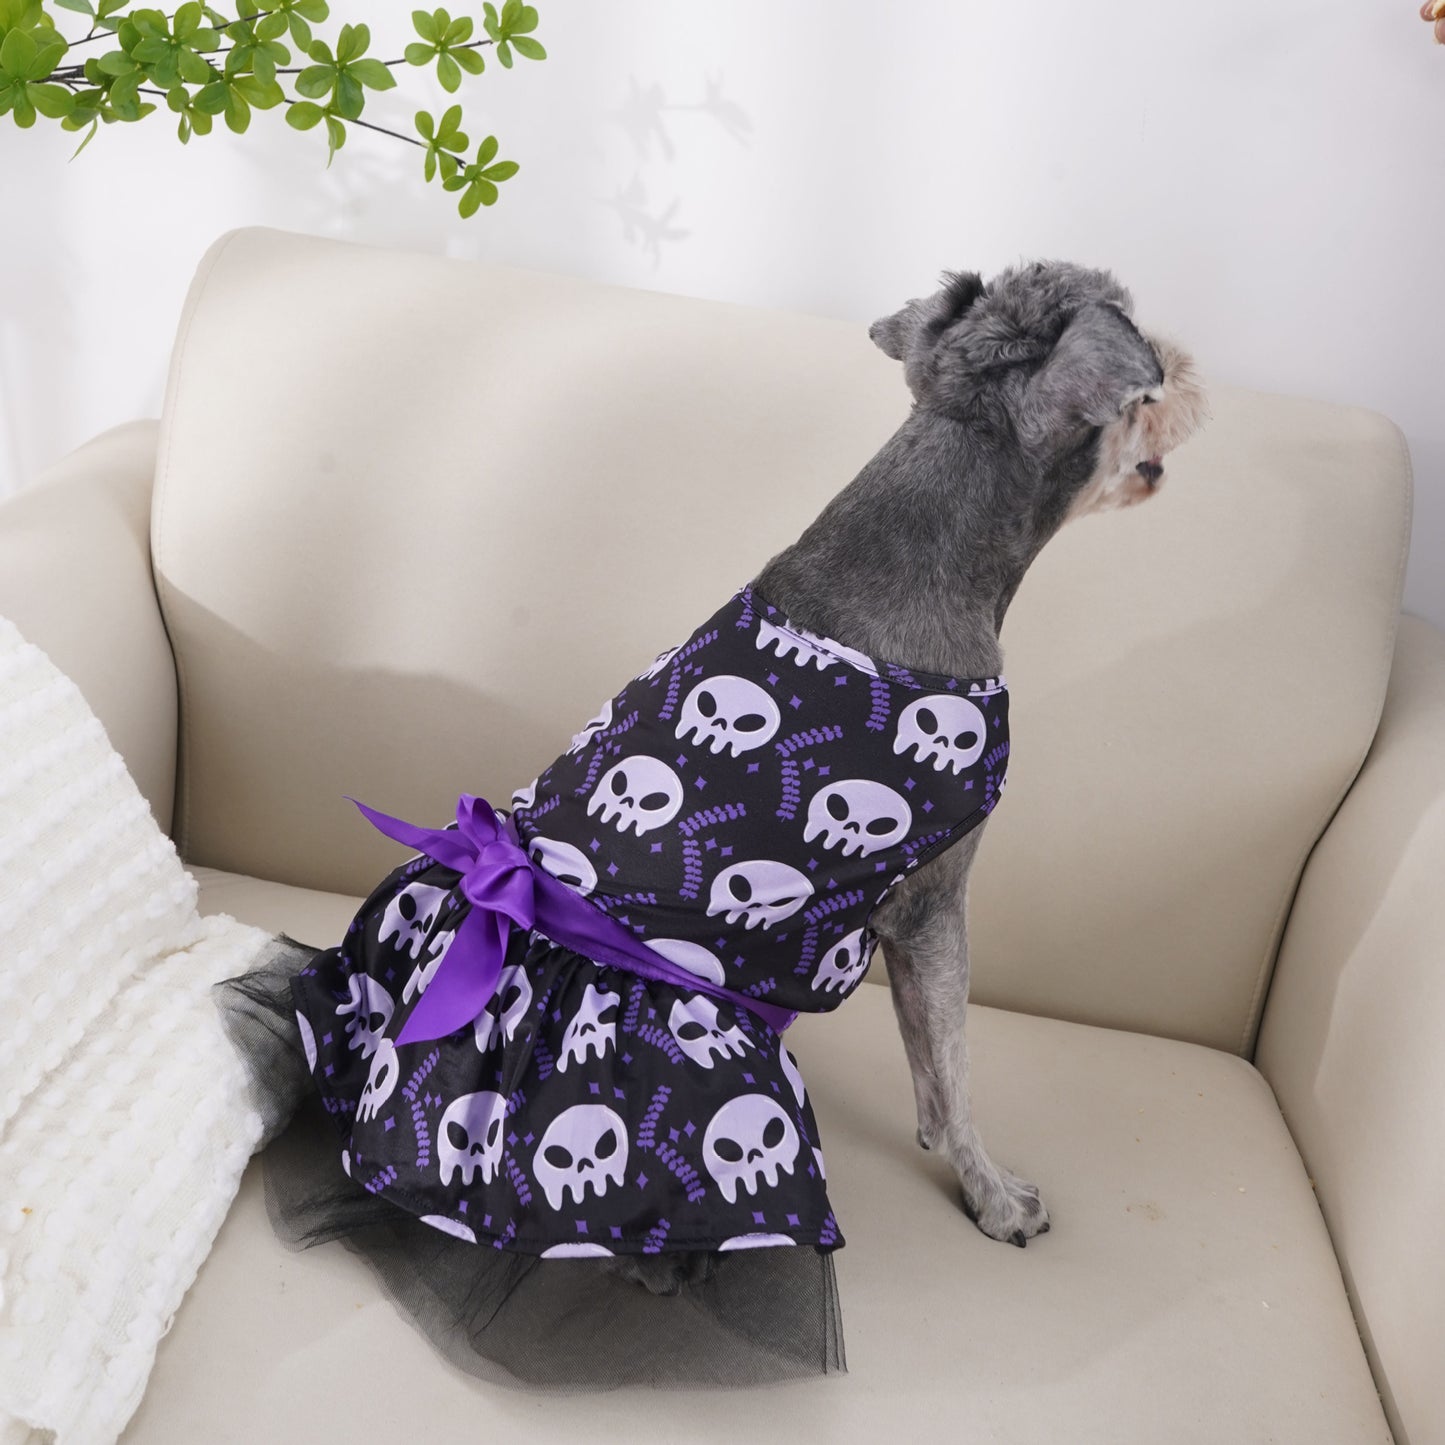 Bewitching Doggy Dress